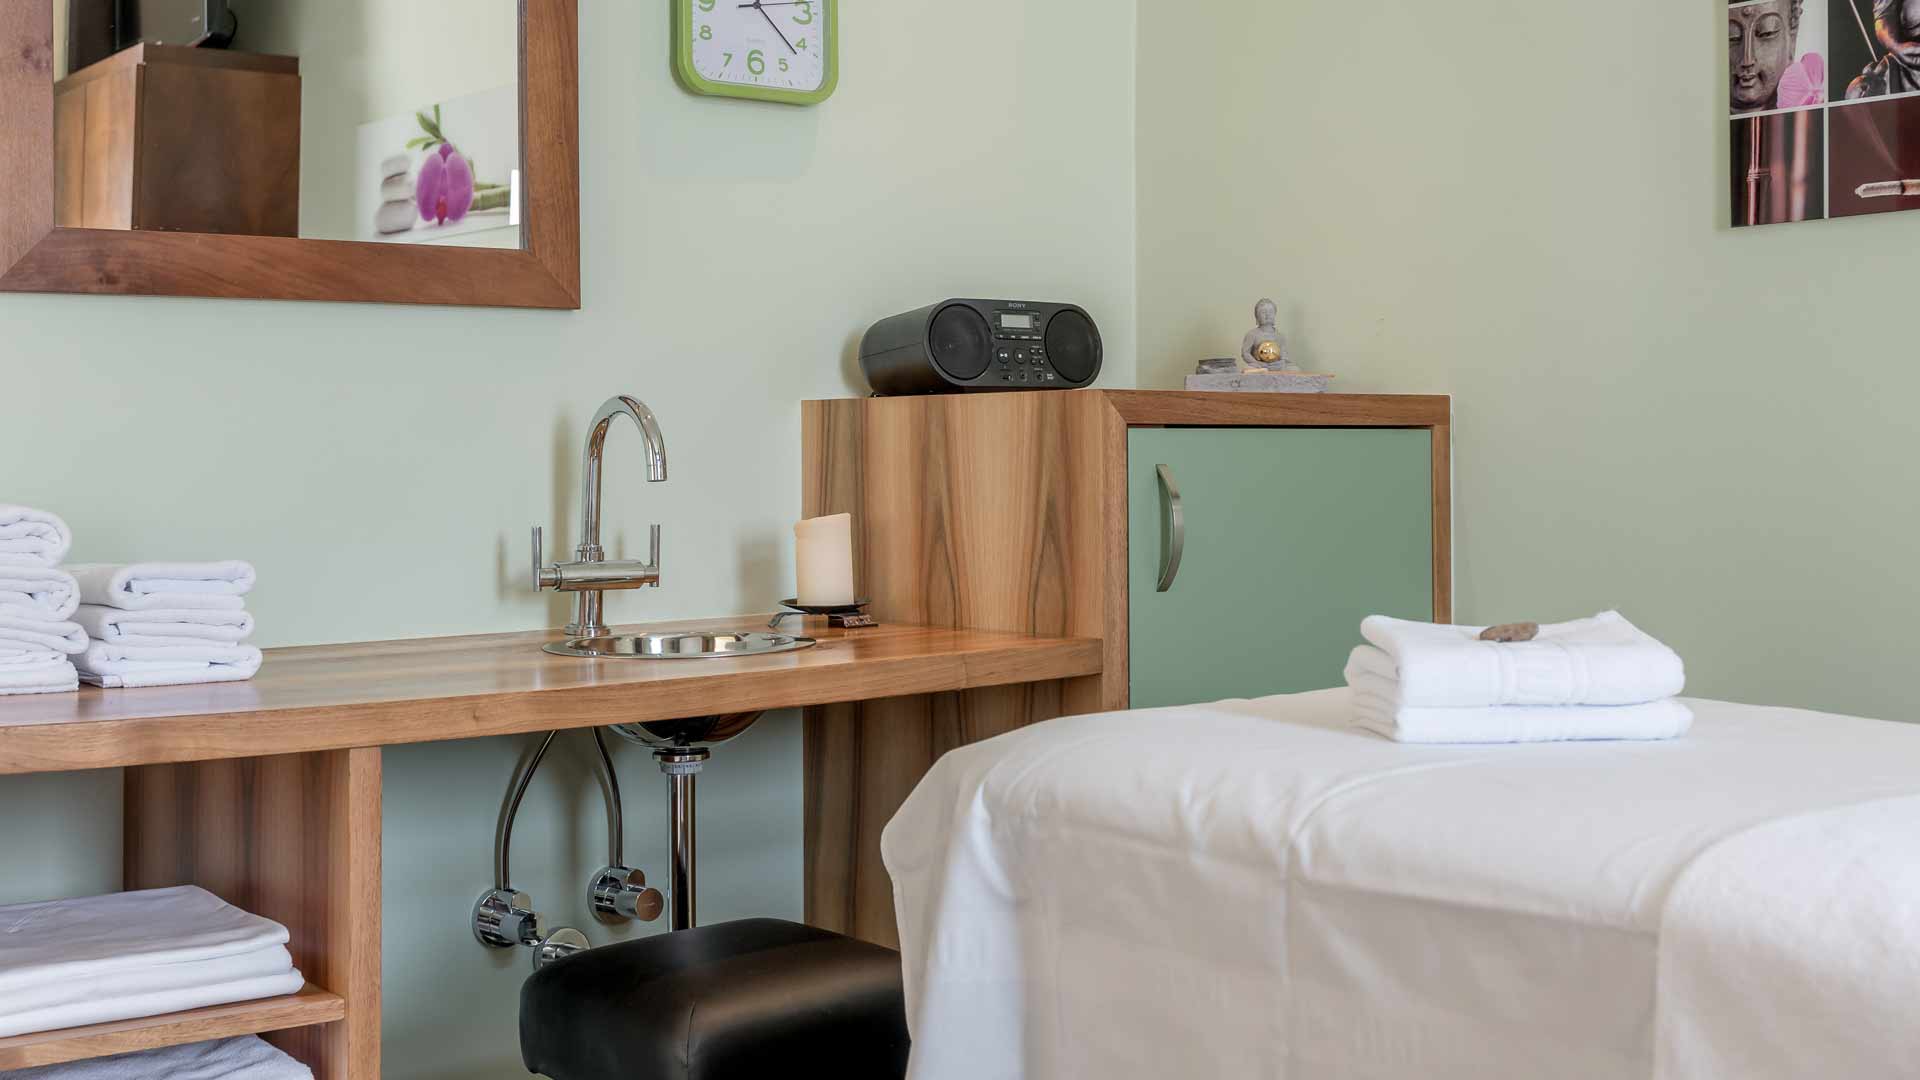 Massage treatments available directly in our spa area. Choose your treatment from our wellness brochure!